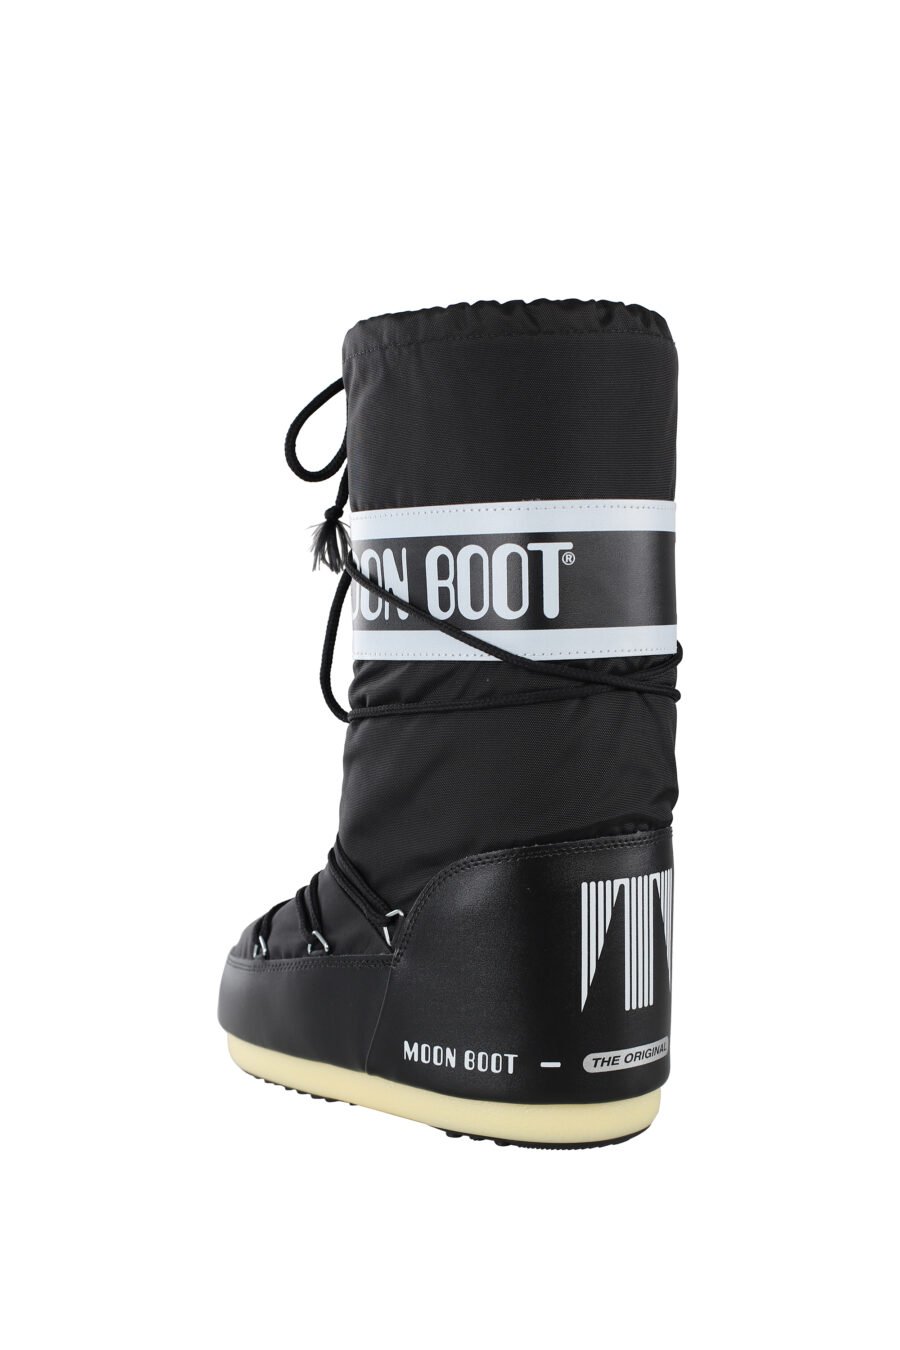 Black snow boots with white logo on ribbon - IMG 6798